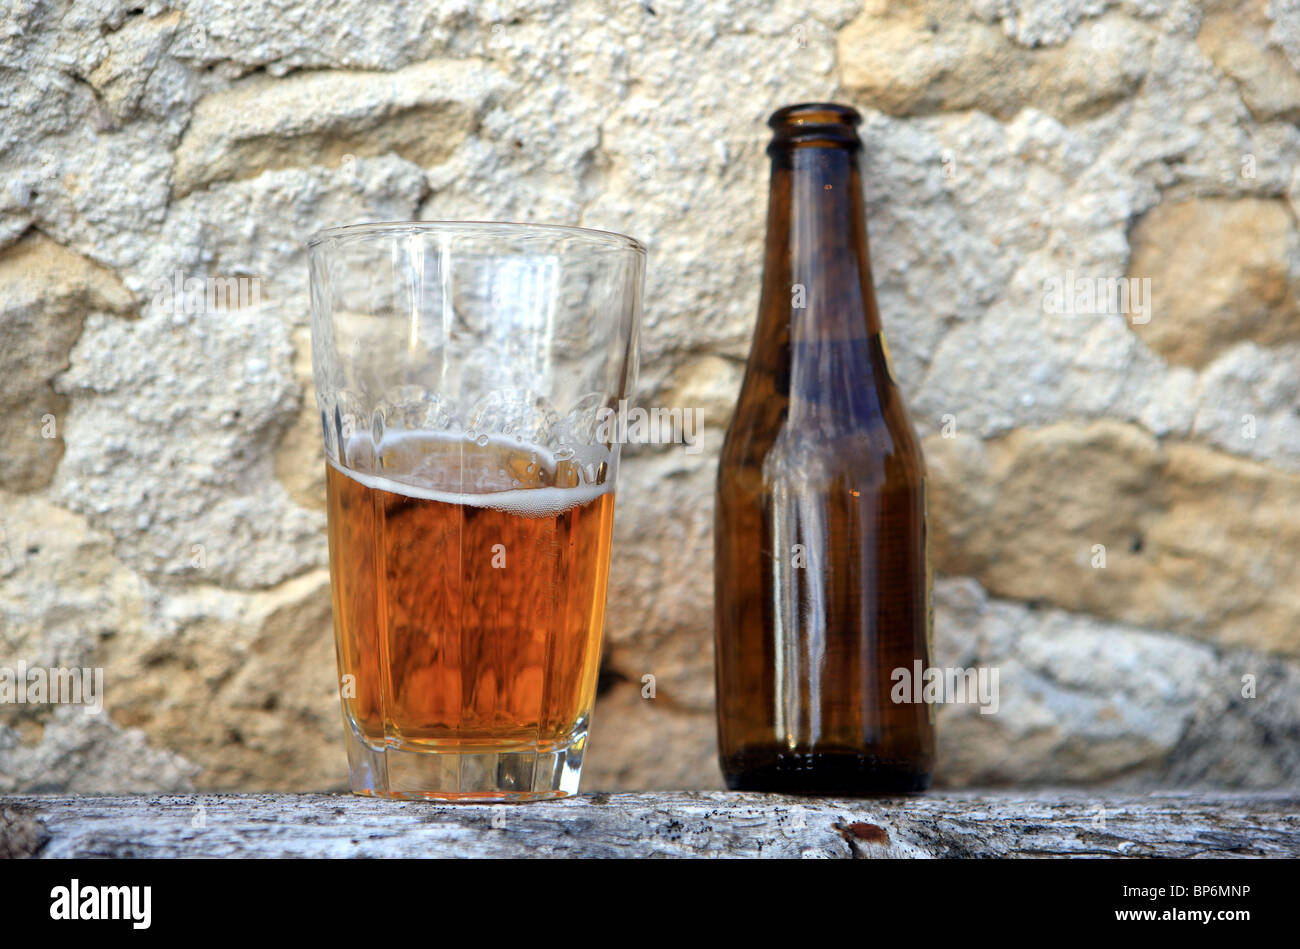 A beer glass and bottle resting on old wood outside an old house on a summer evening Stock Photo